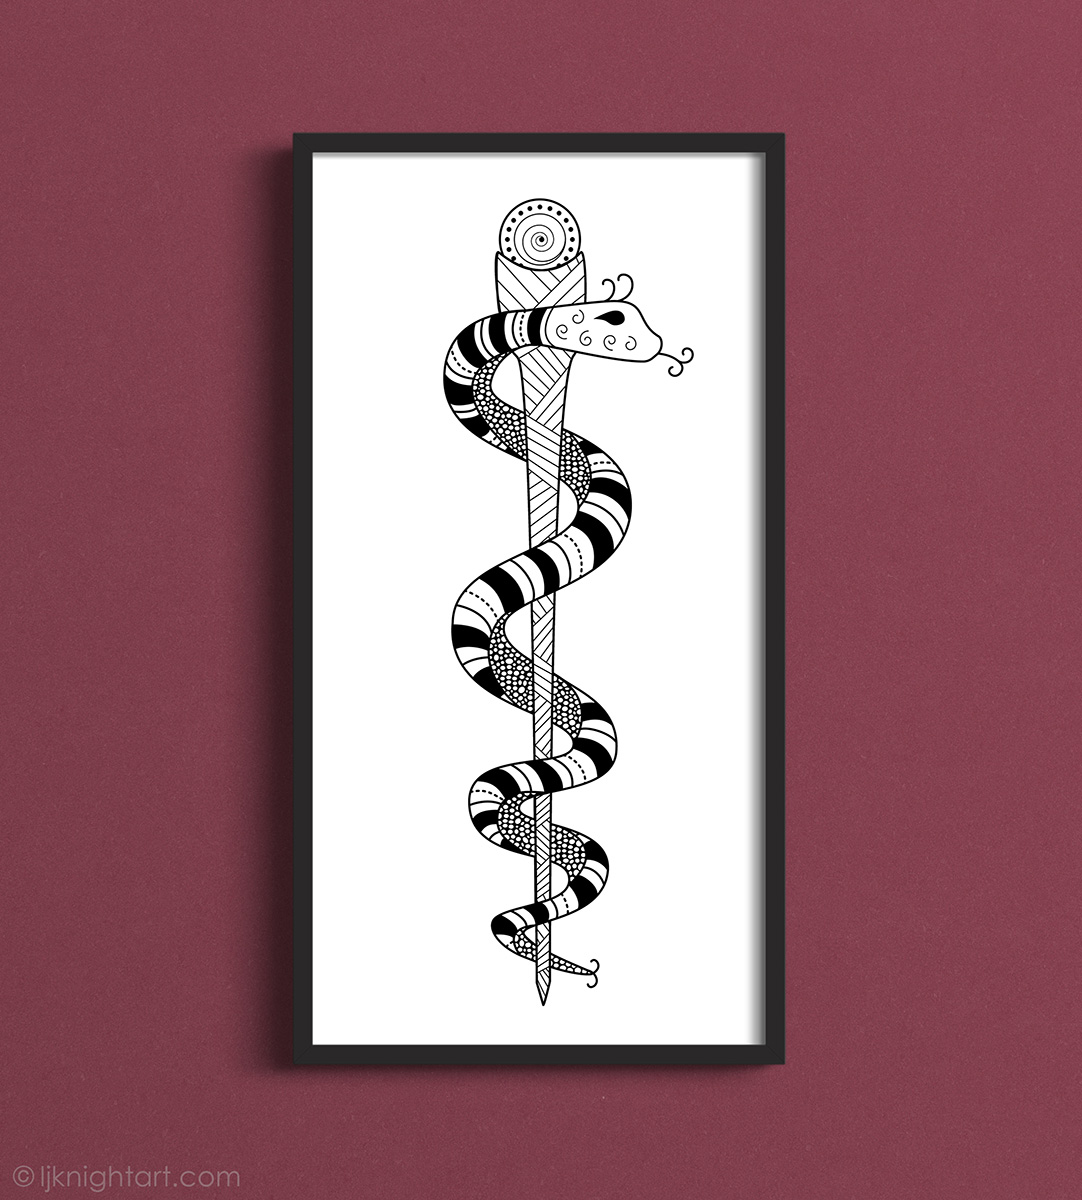 Monochrome wall art with a drawing of the Rod of Ascelpius, featuring a snake wrapped around a staff